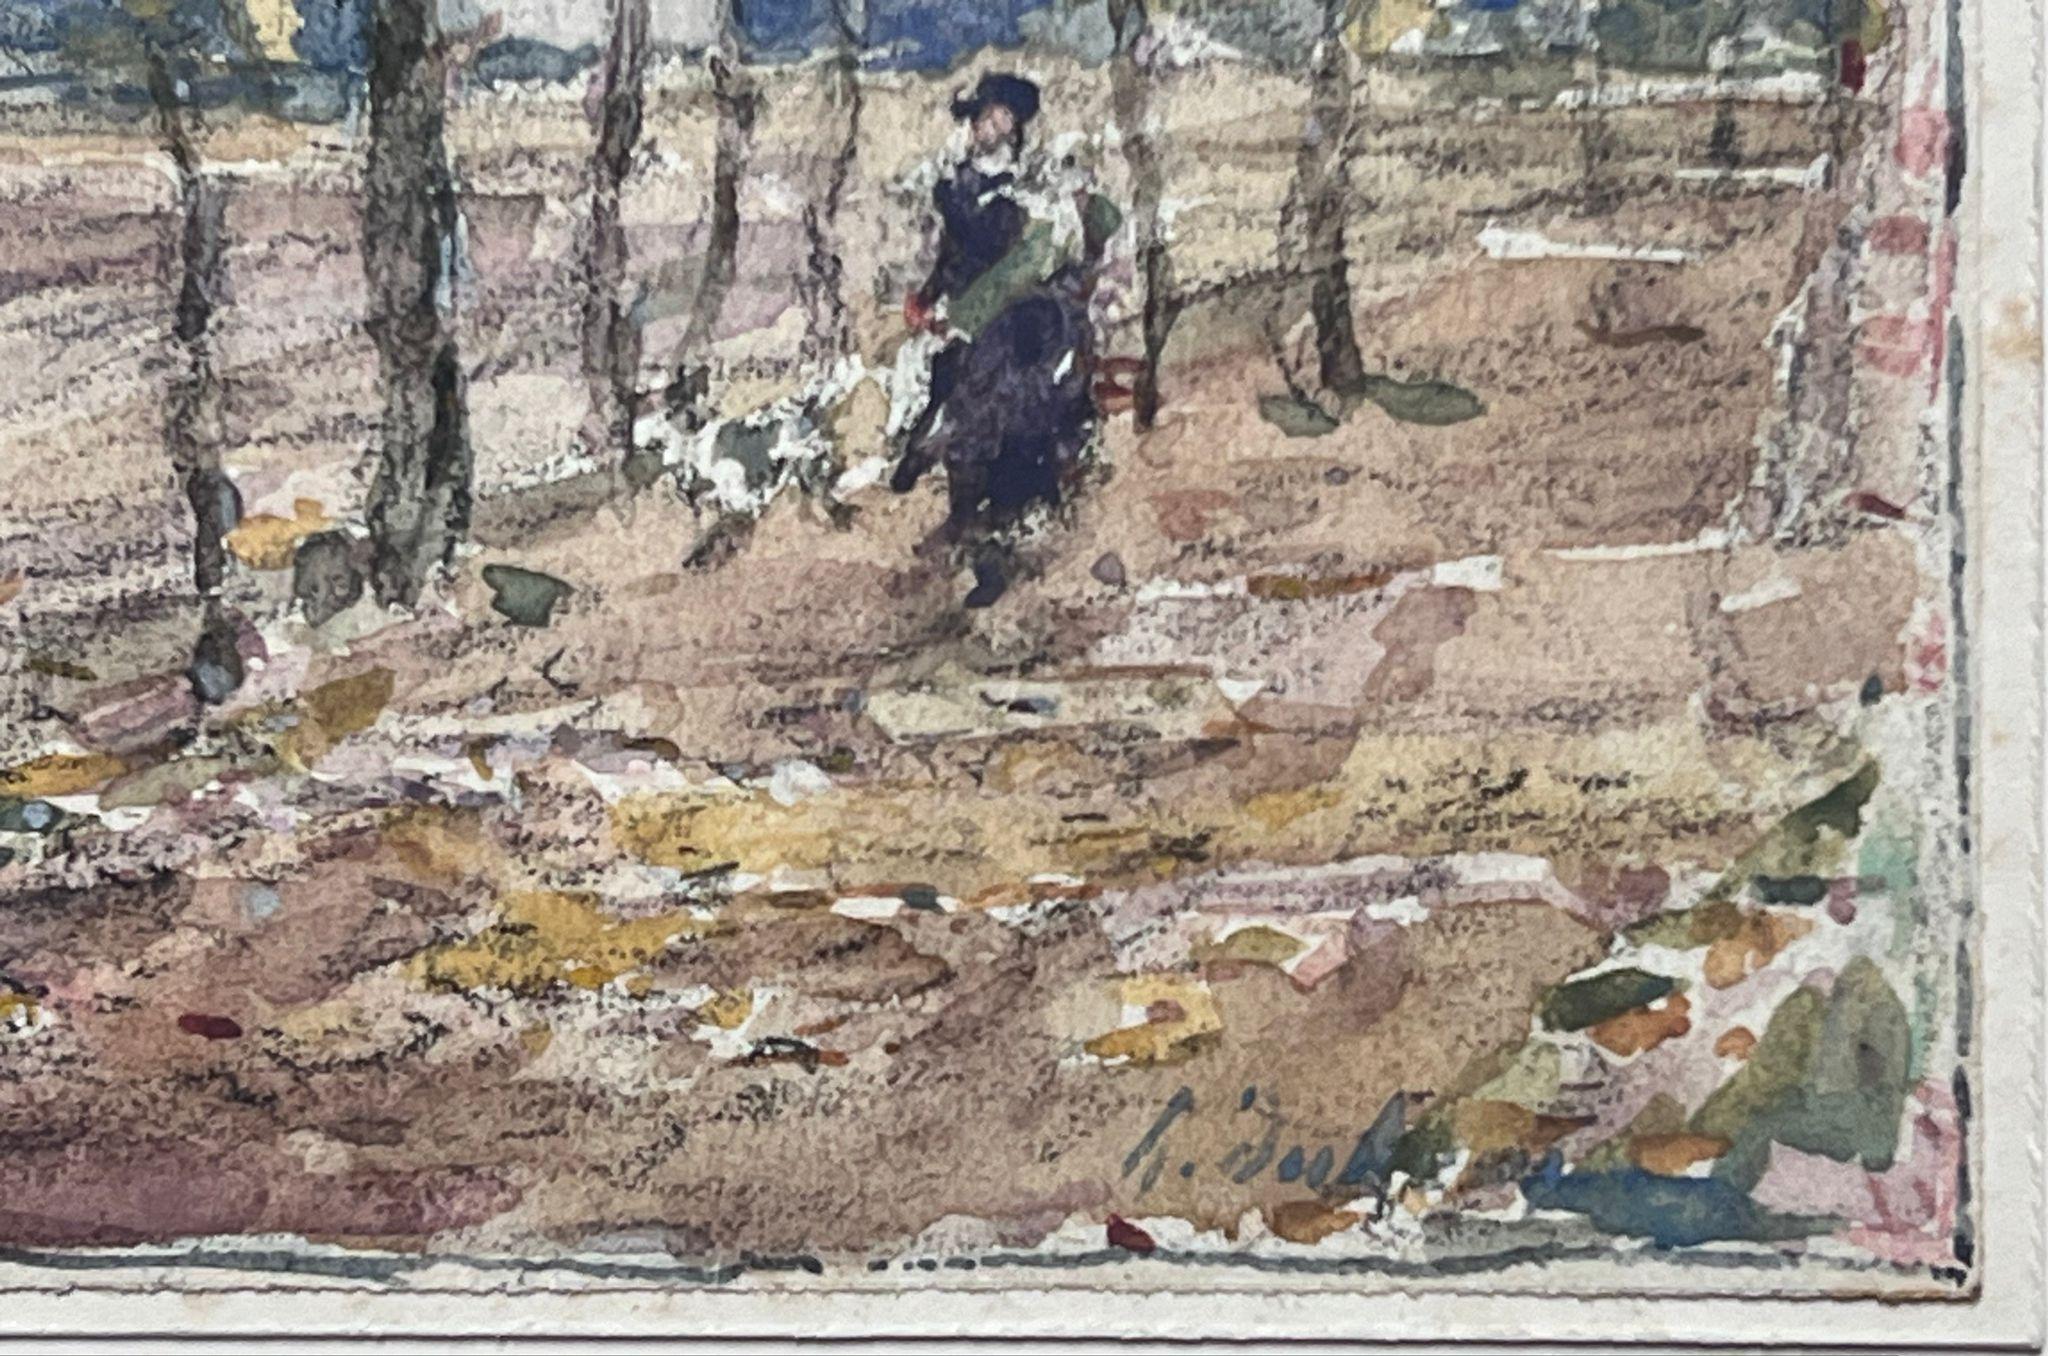 The artist: 
Henri Aime Duhem (1860-1941) French *see notes below, signed 

Title: Figure in Woodland

Medium:  
signed gouache on paper, loosely laid over card, unframed

card: 4 x 5.5 inches

Provenance: 
private collection of this artists work